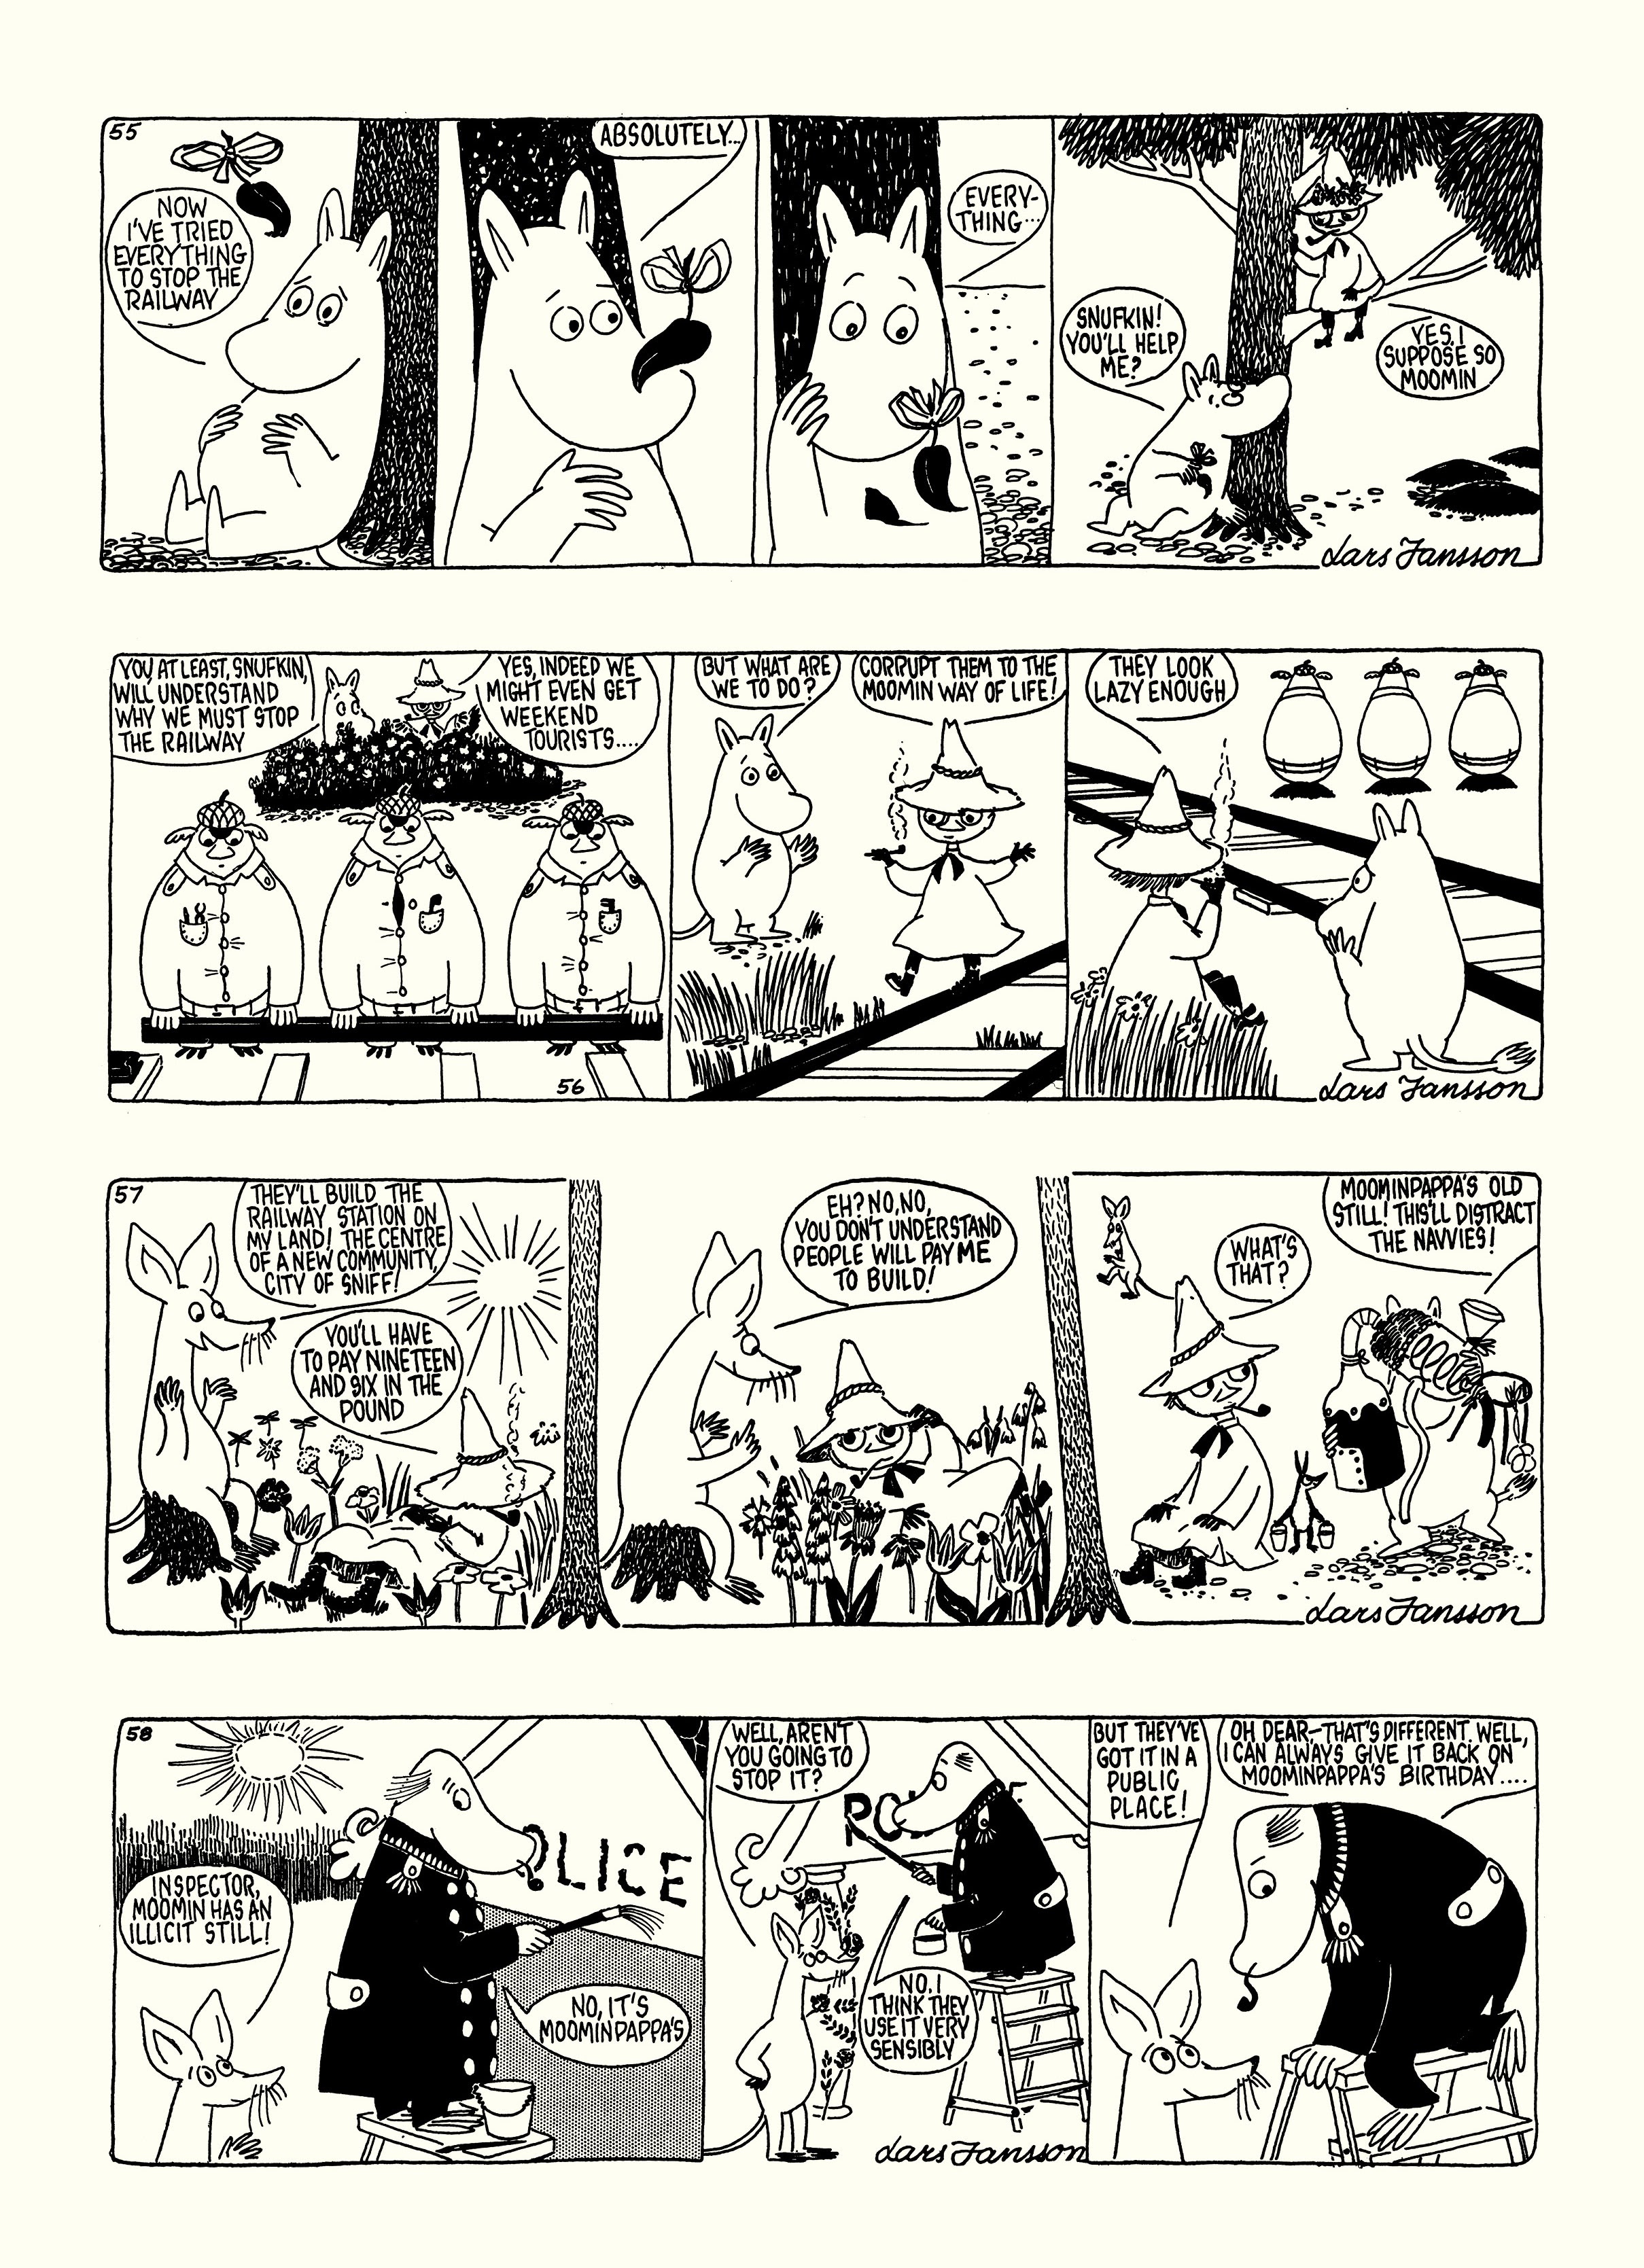 Read online Moomin: The Complete Lars Jansson Comic Strip comic -  Issue # TPB 6 - 40